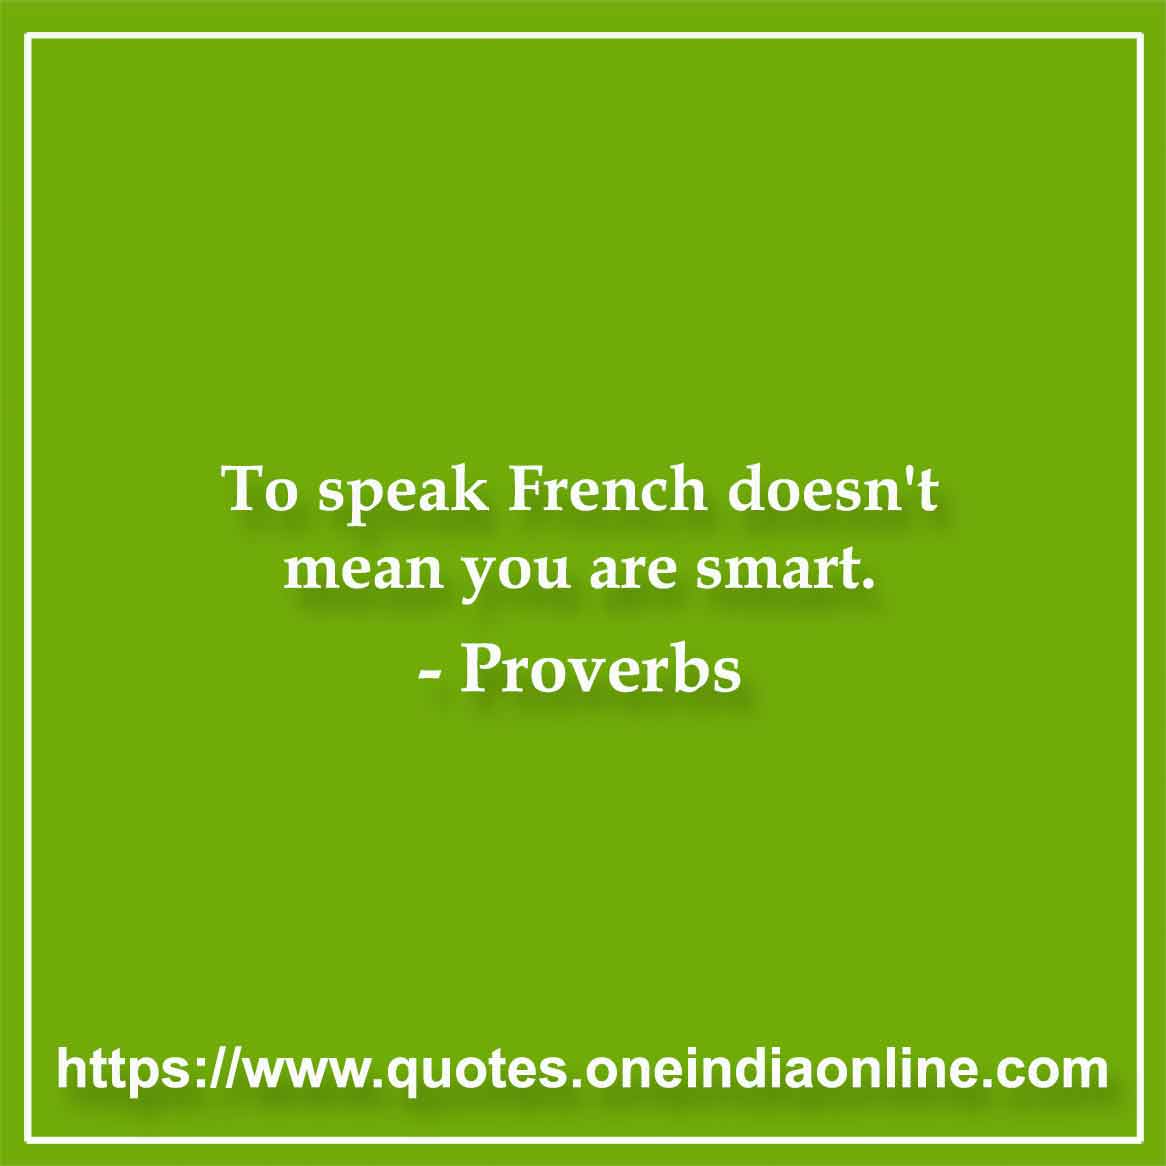 To speak French doesn't mean you are smart.